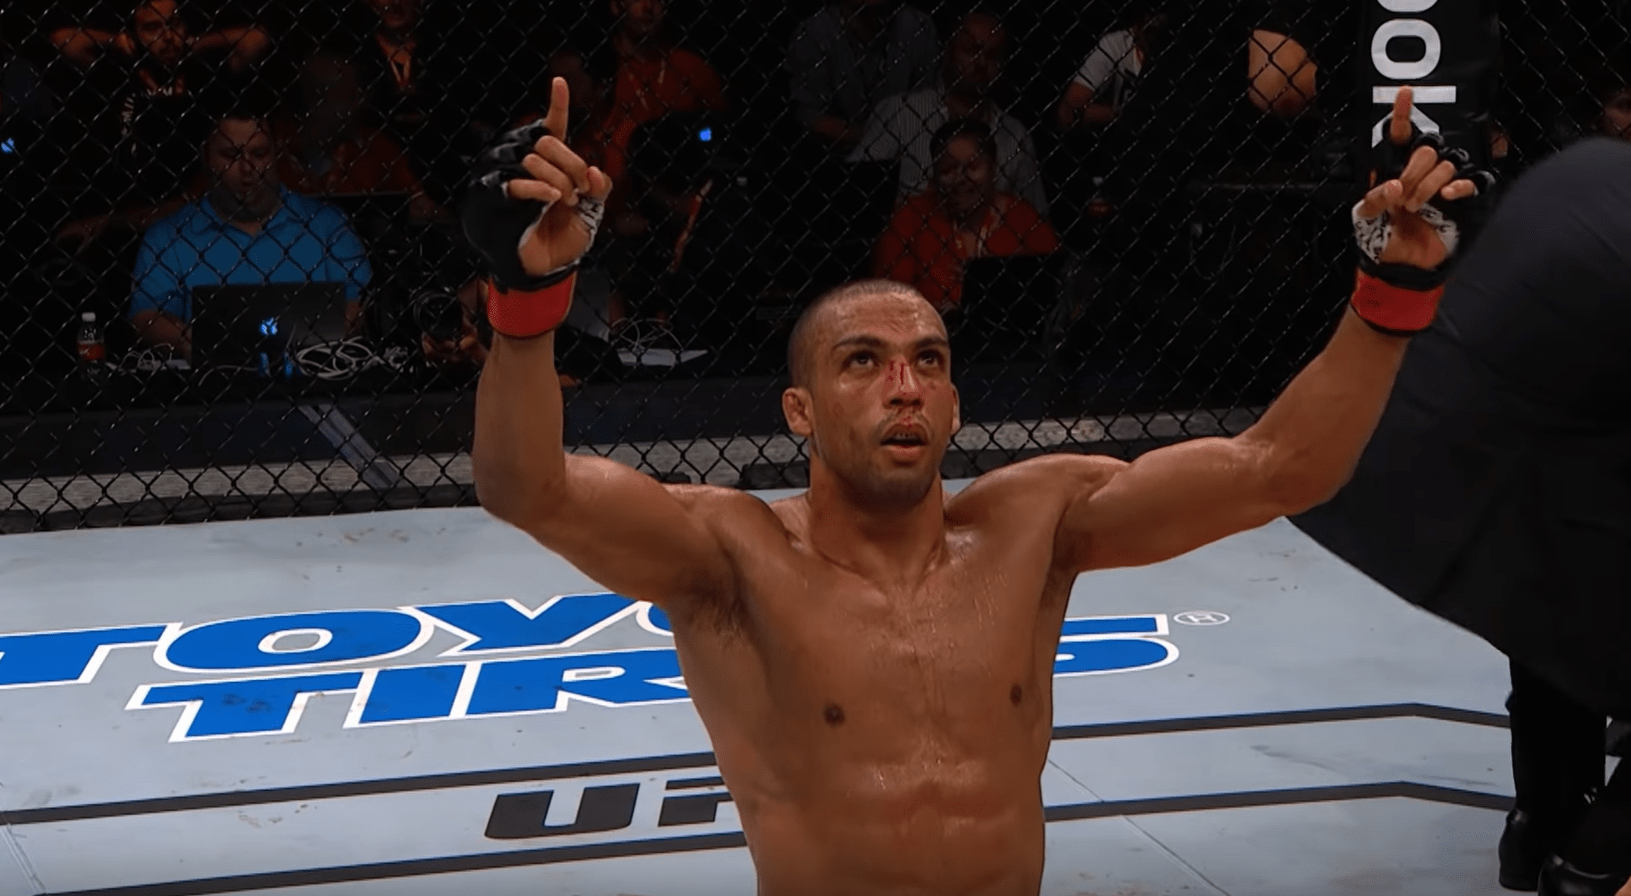 Edson Barboza celebrating victory in the UFC set to move from lightweight to featherweight division